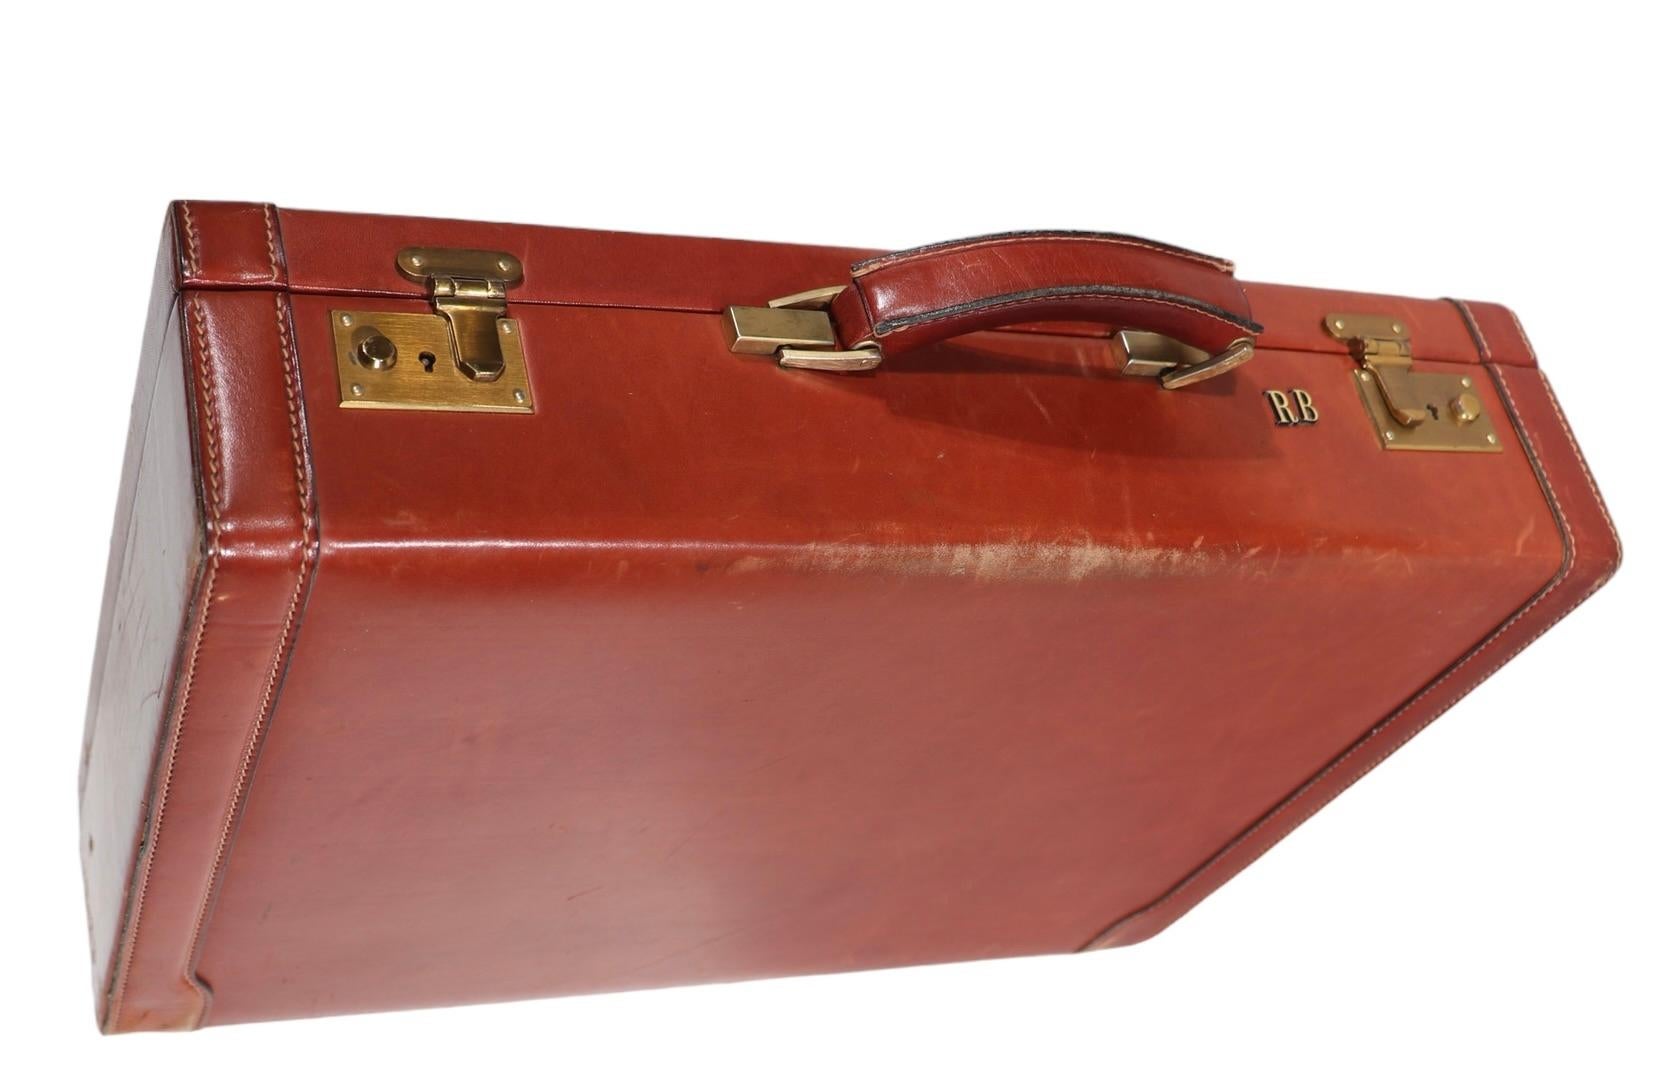  Mid Century Art Deco Hard Case Leather Attache Briefcase  after Bally, Hermes  For Sale 2